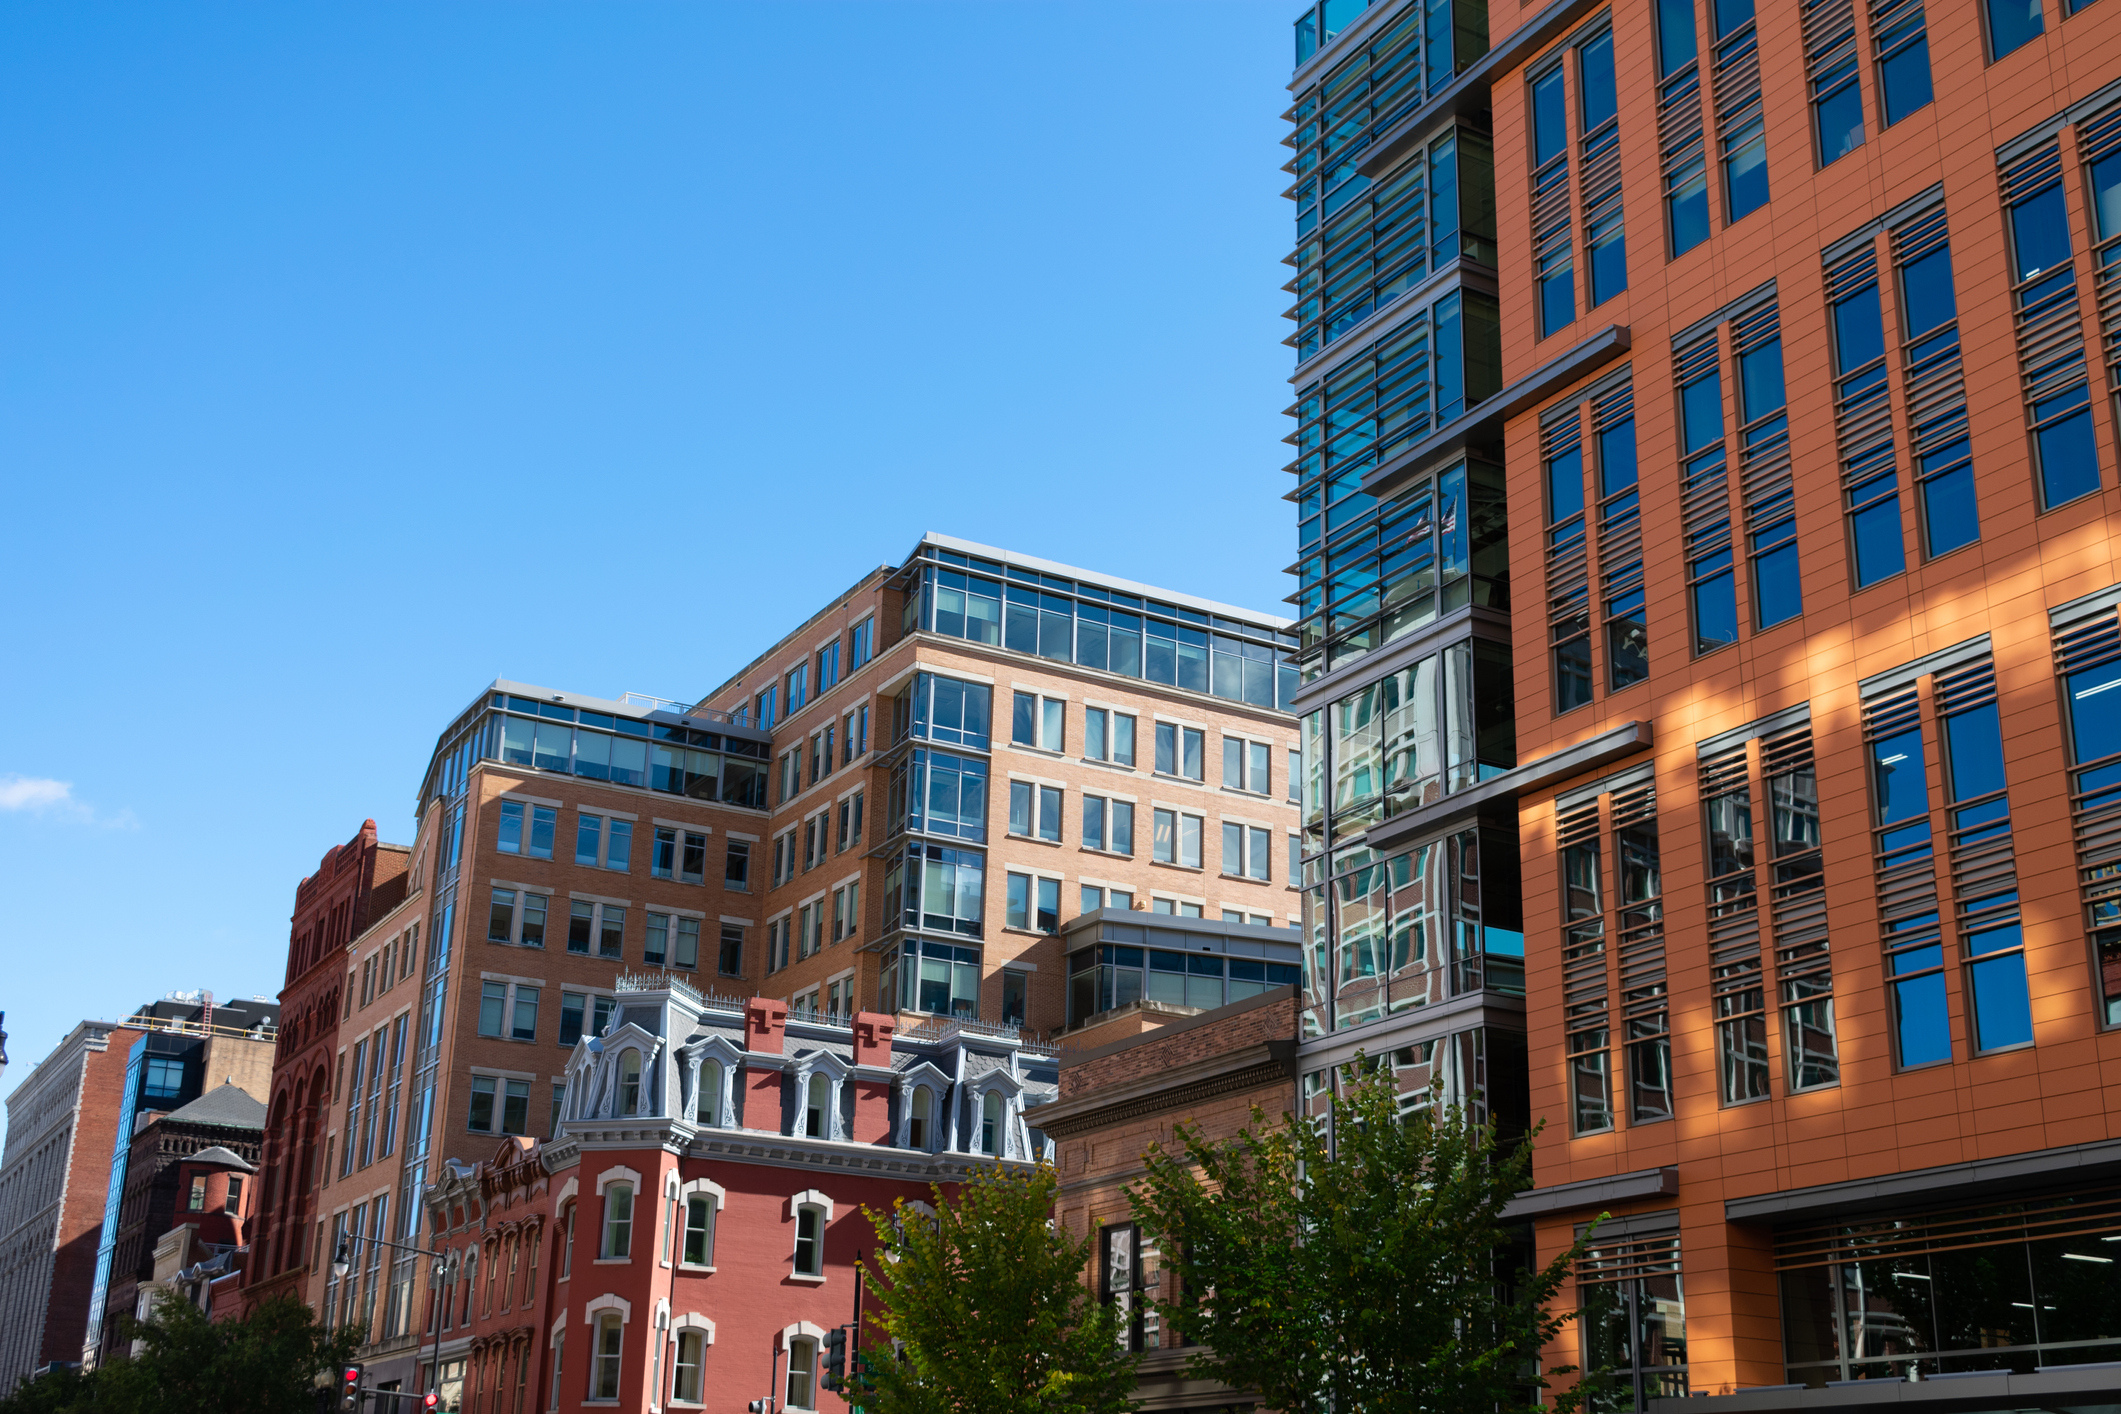 Adaptive reuse of office buildings continues to led the way in residential conversions.